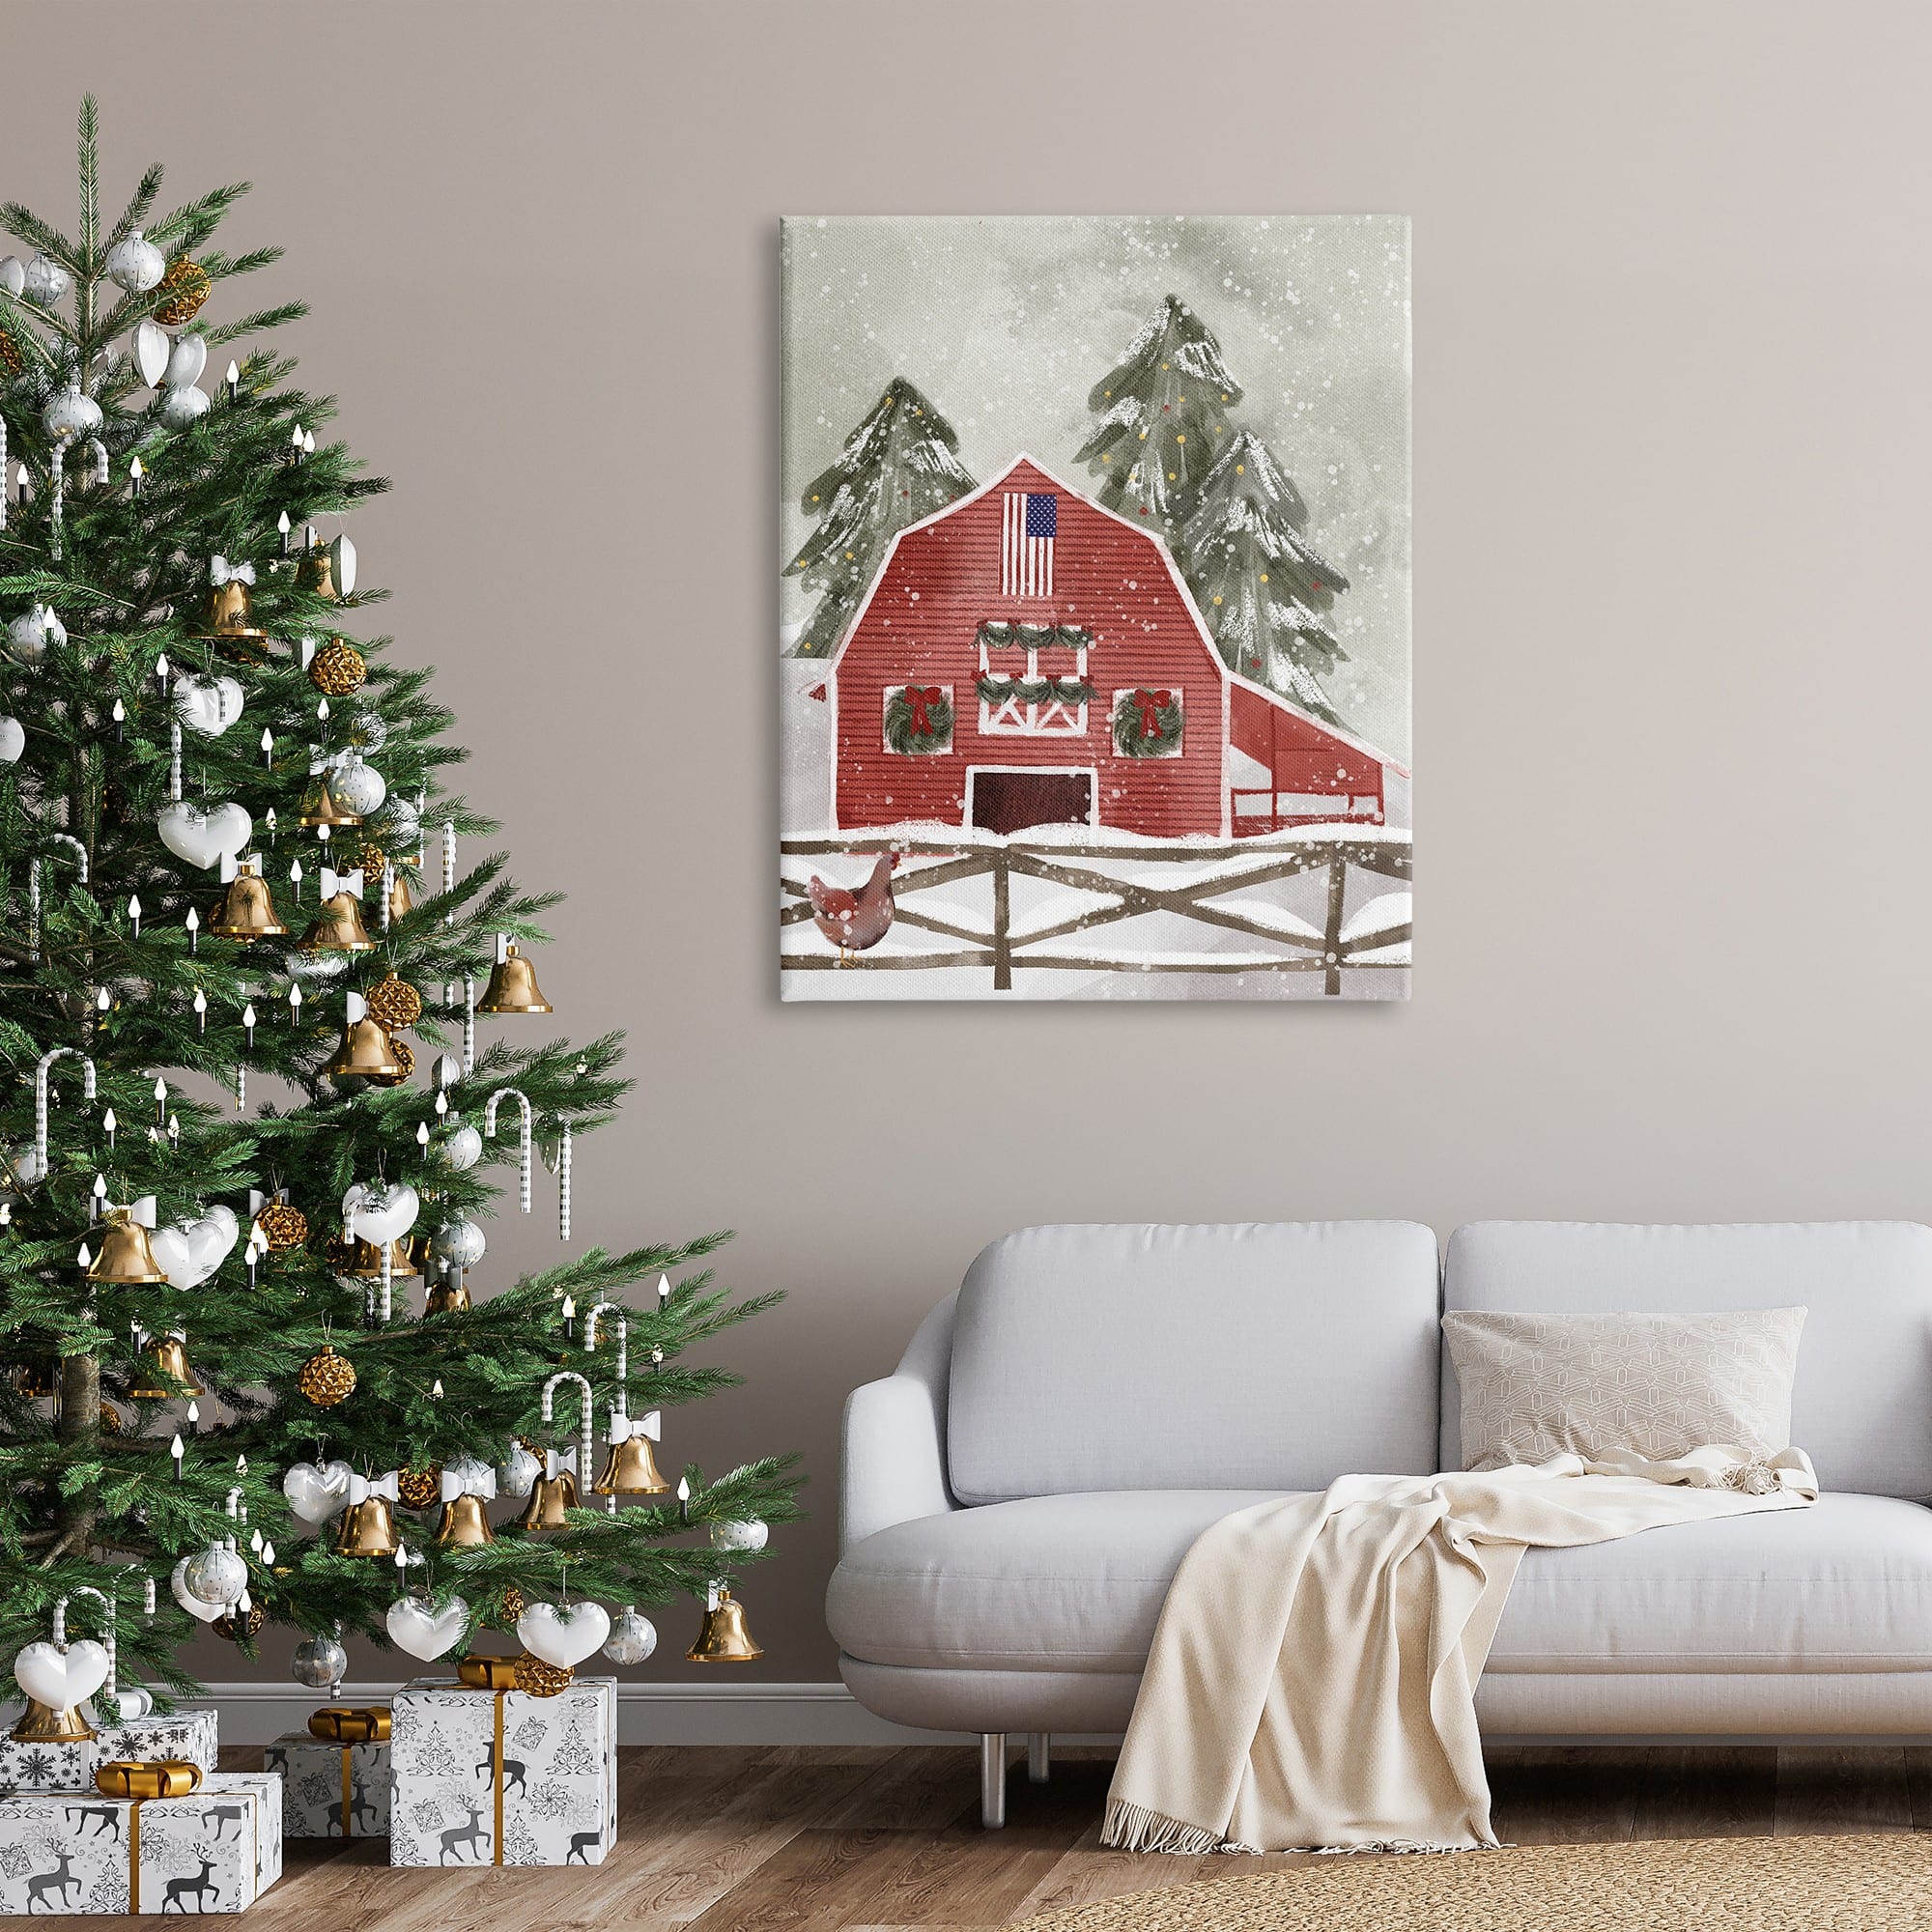 Stupell Industries Snowy Country Barn American Flag Canvas Wall Art